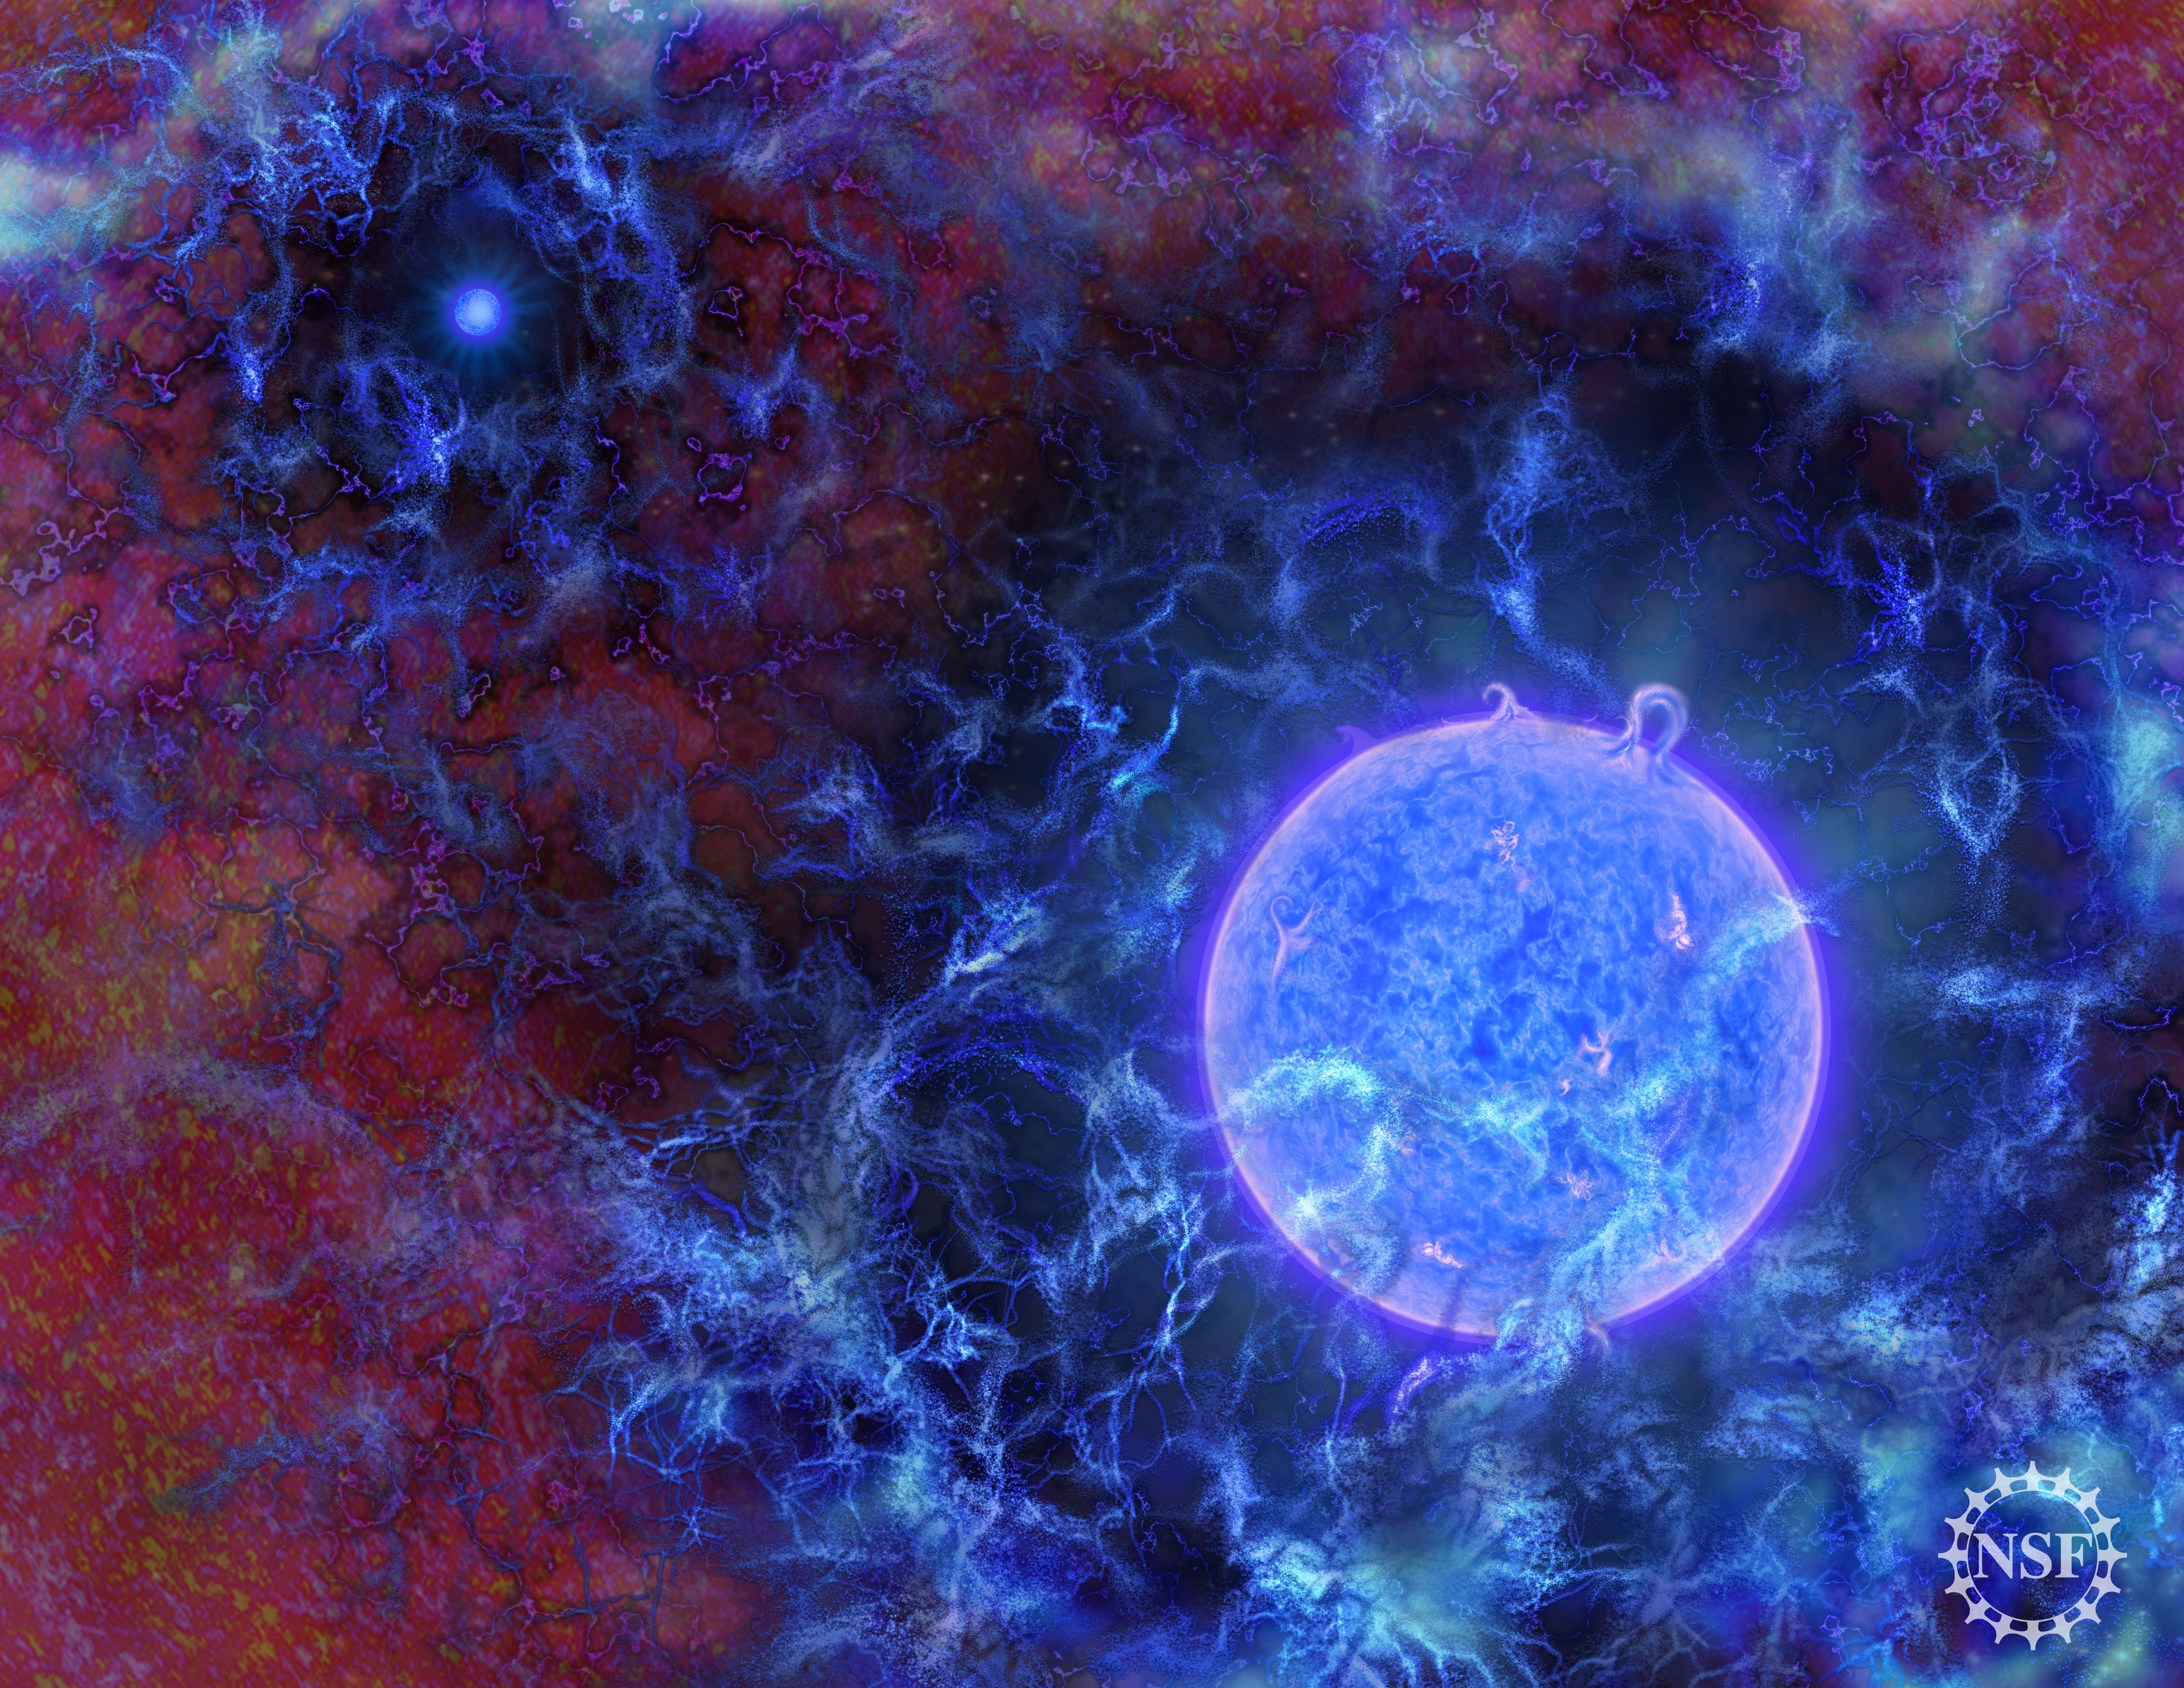 Artist's rendering of how the first stars in the universe may have looked. Credit: N.R.Fuller, National Science Foundation